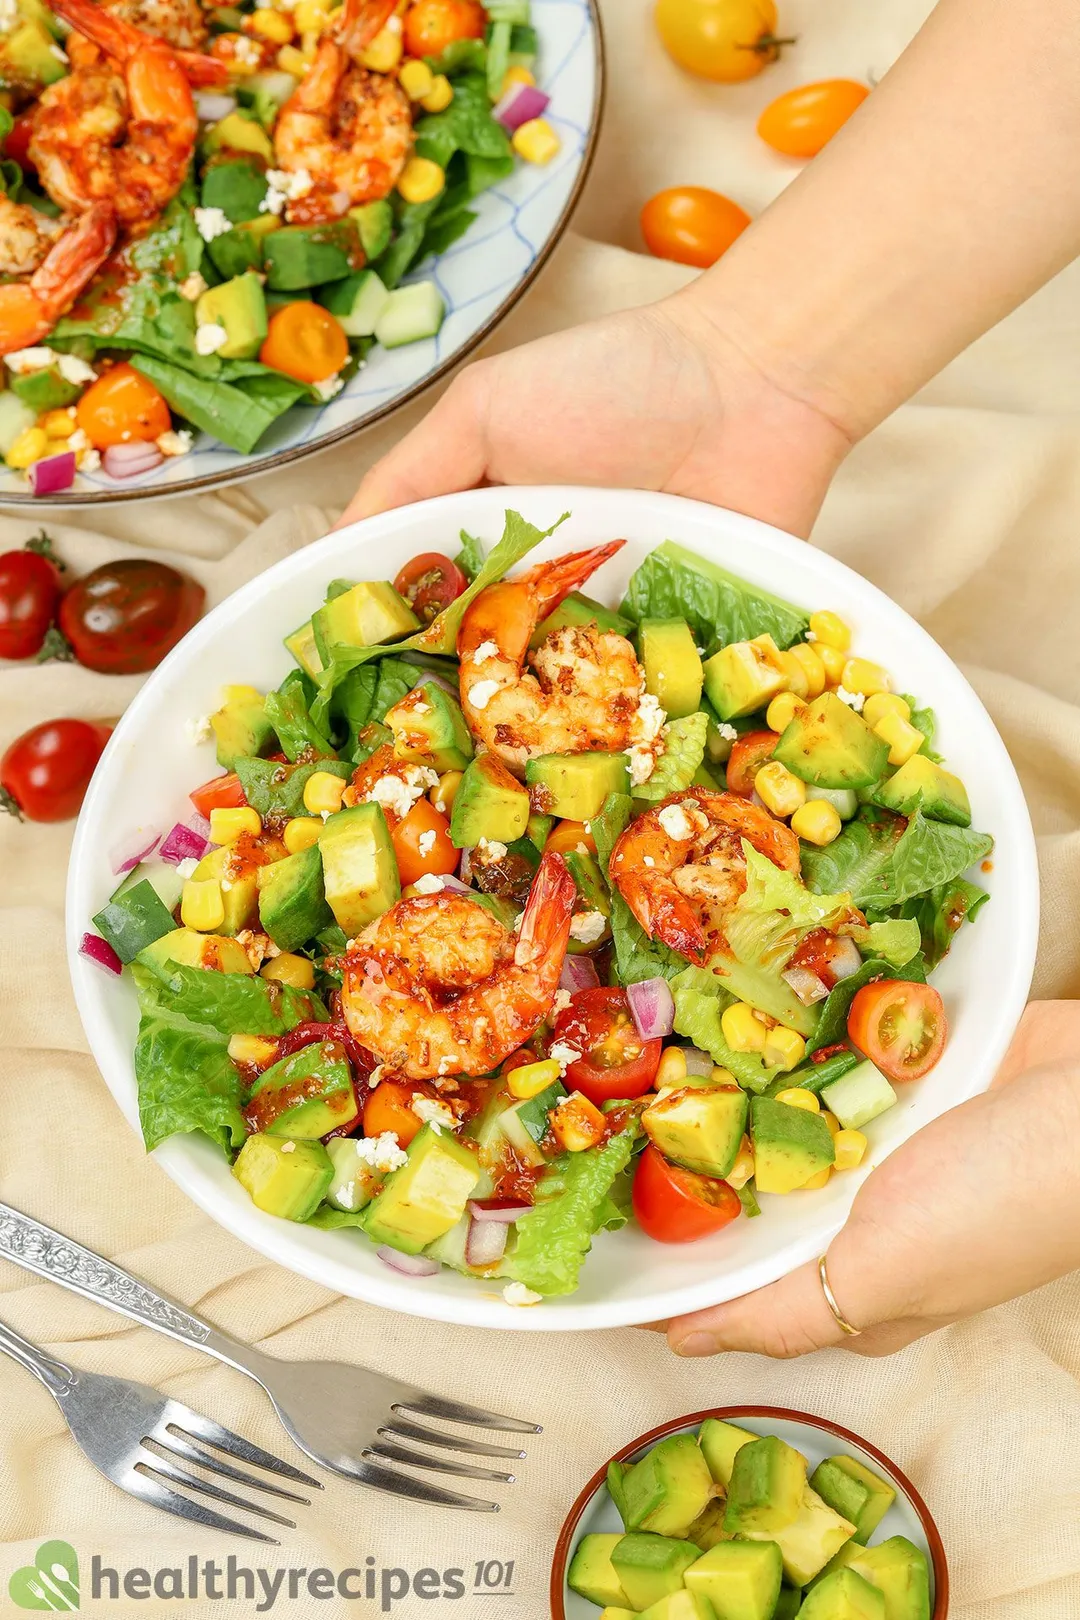 two hands holding a plate of cooked shrimp and avocado cubes salad decorated by a small plate of avocado cubes and some cherry tomatoes and fork